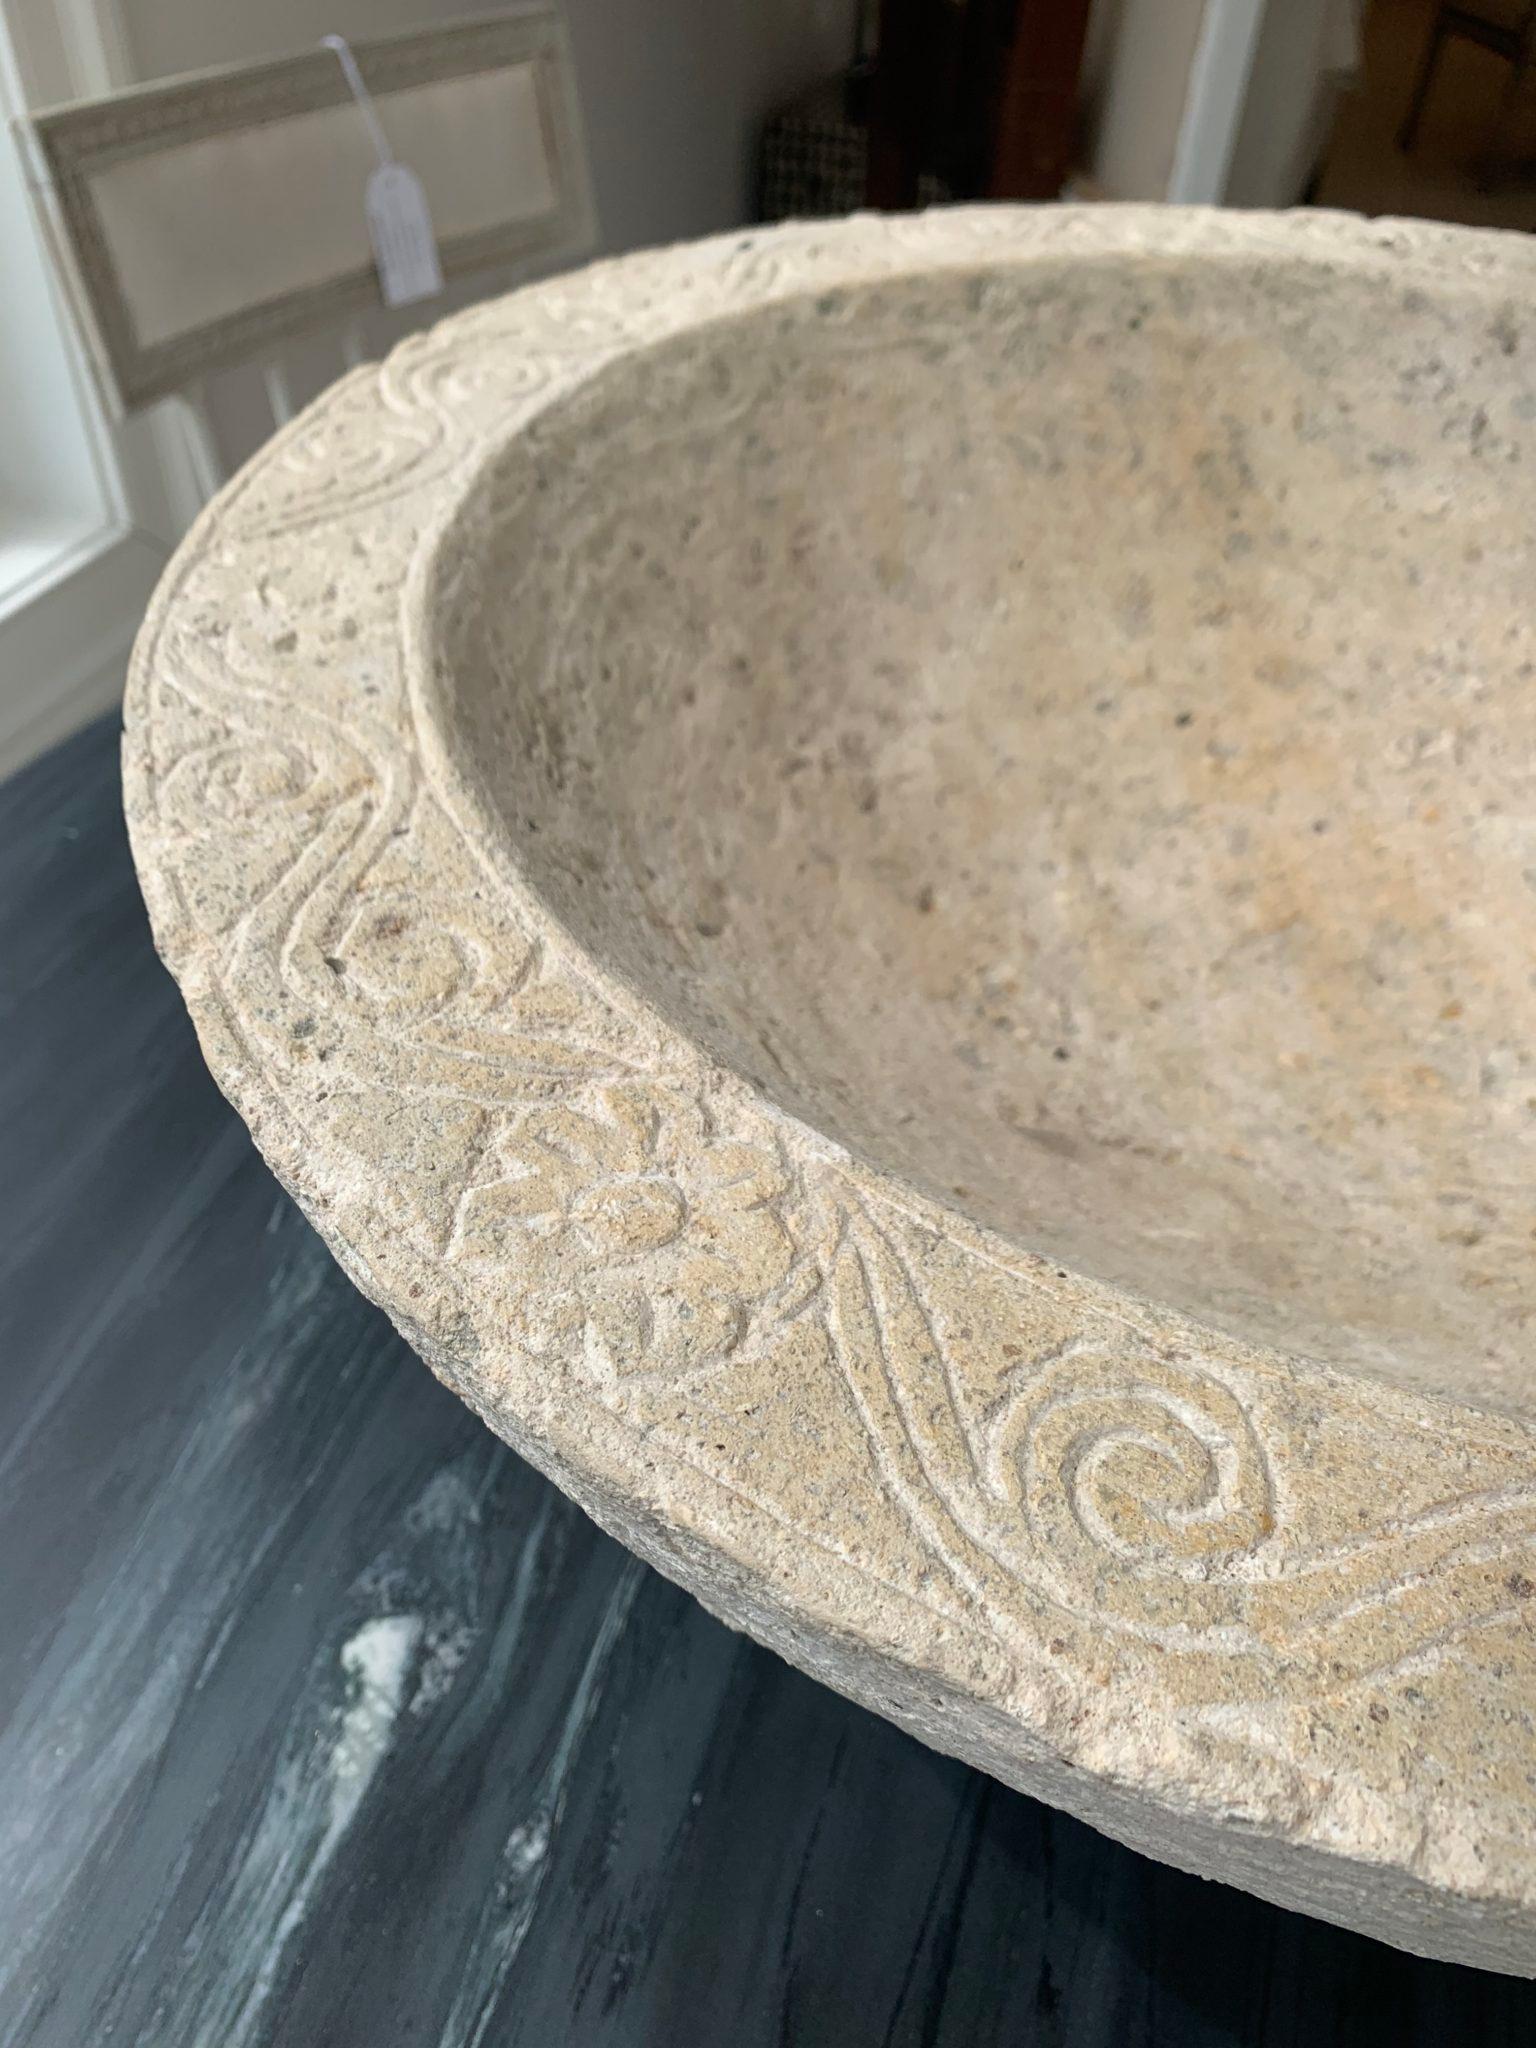 Large, very heavy limestone bowl with carving on the top rim.